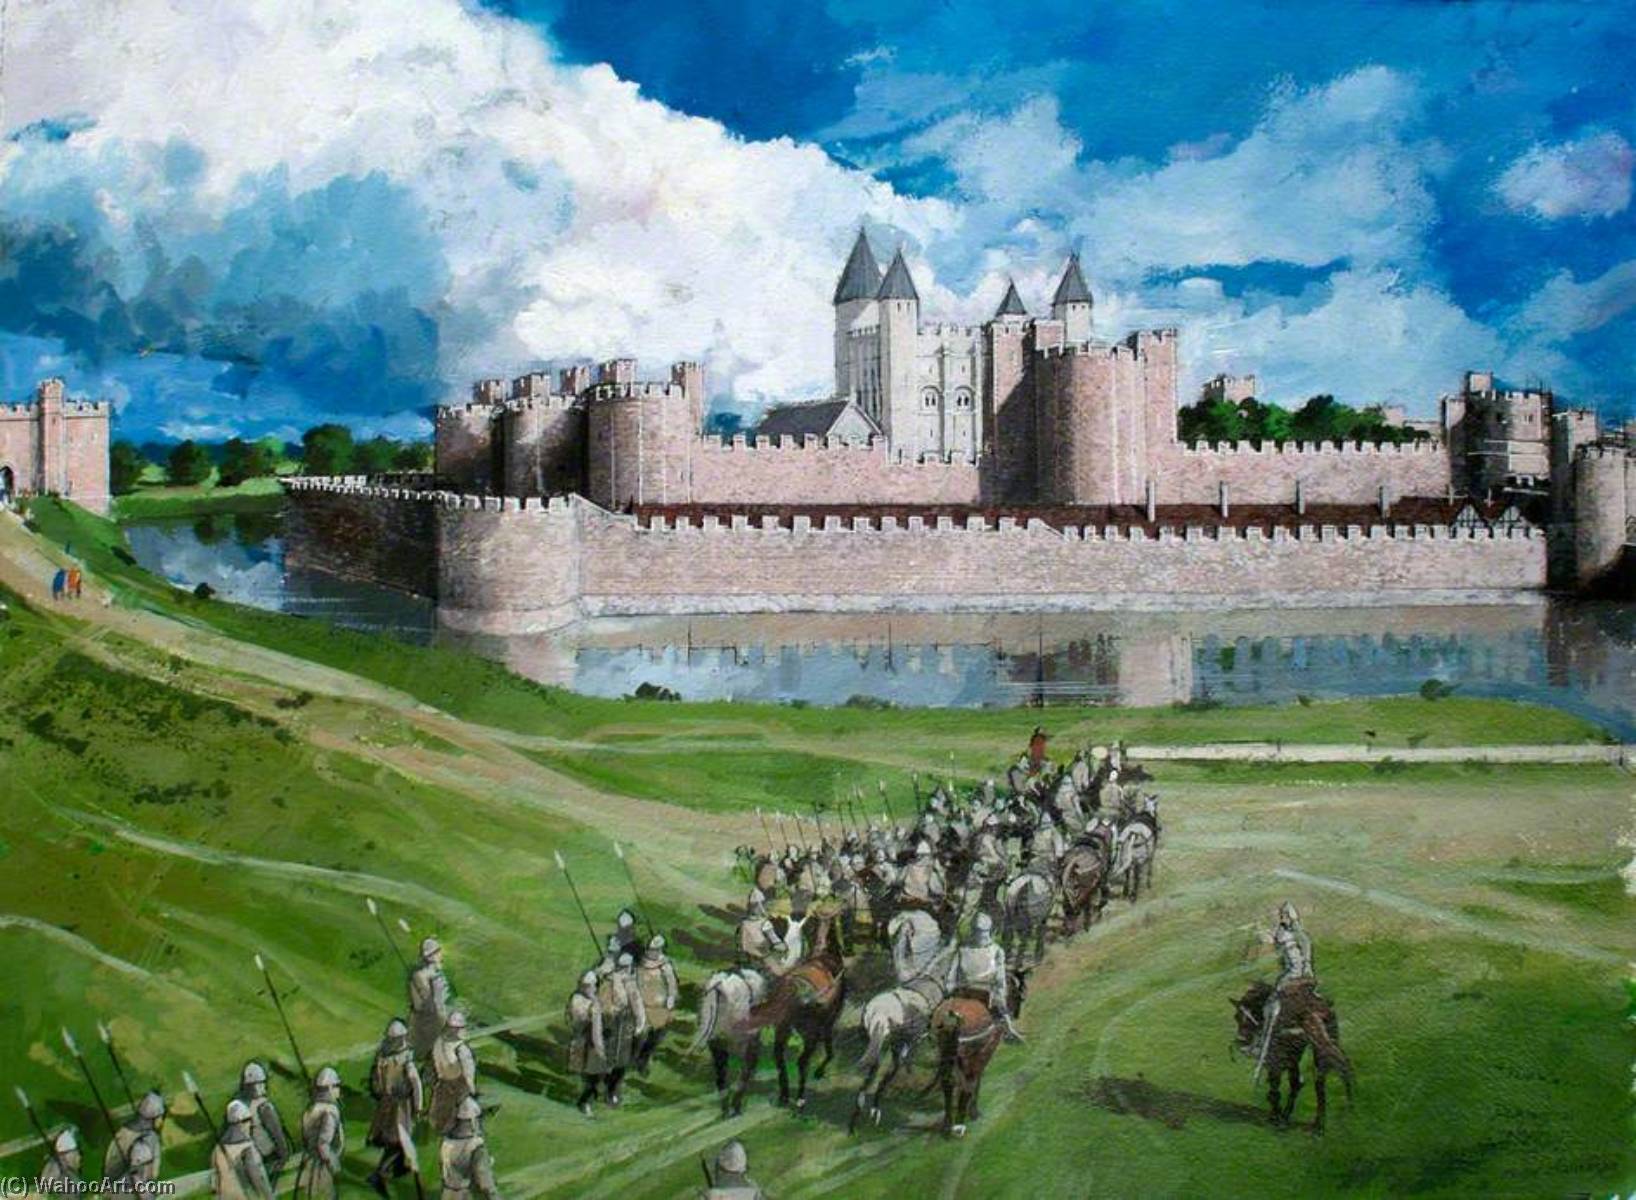 WikiOO.org - Encyclopedia of Fine Arts - Maľba, Artwork Ivan Lapper - Reconstructed View of the Tower of London, Edward I's Completed Outer Wall, 1300